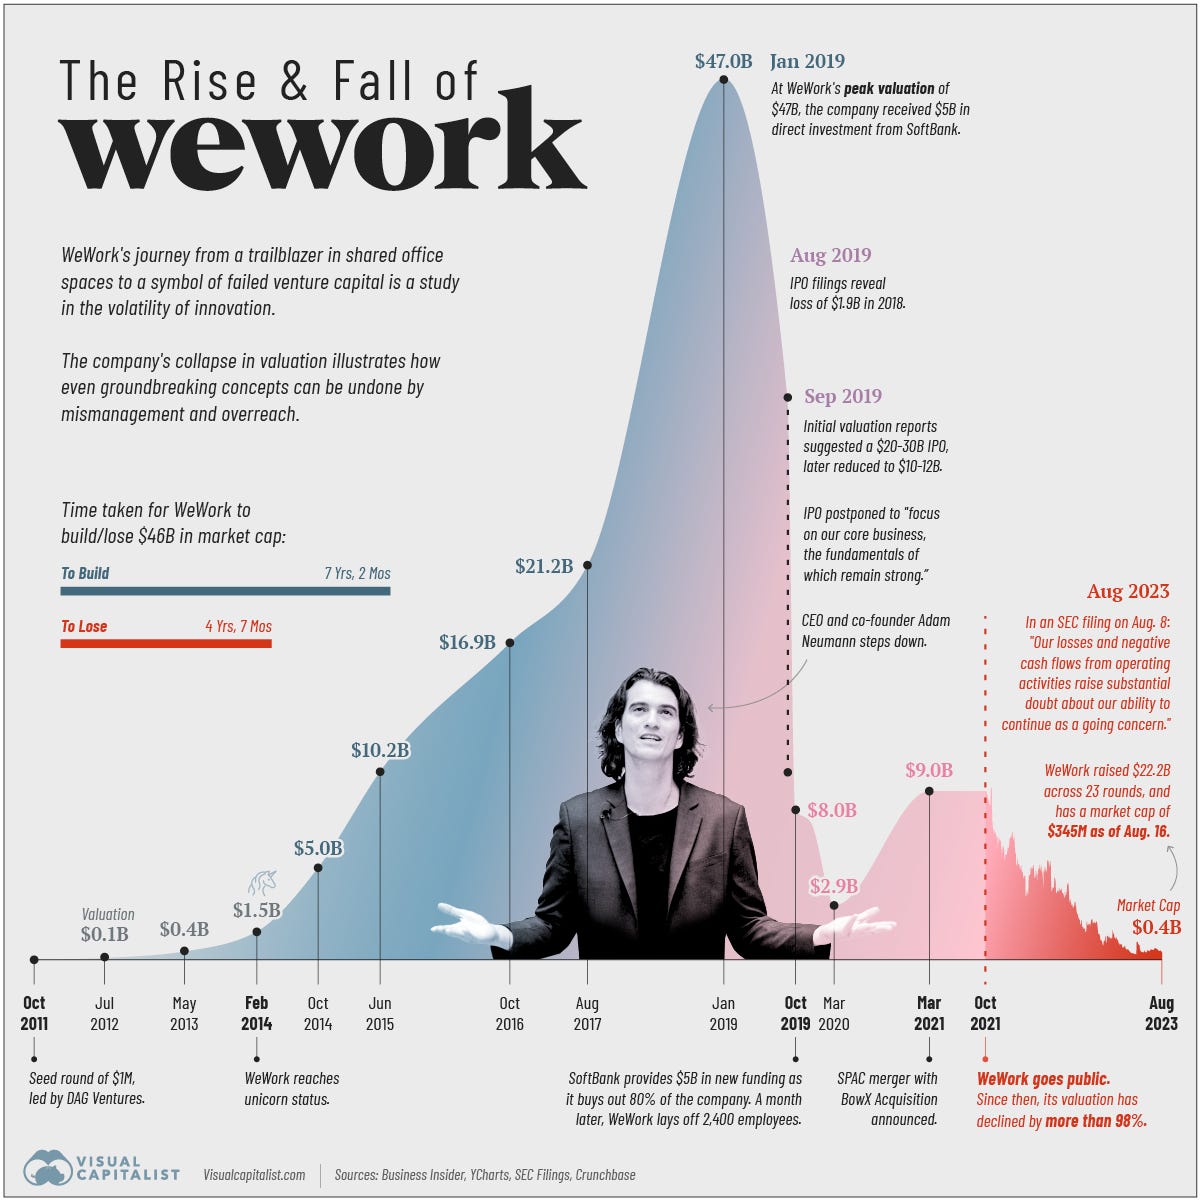 Timeline chart of WeWork's valuation history, with notable events annotated.